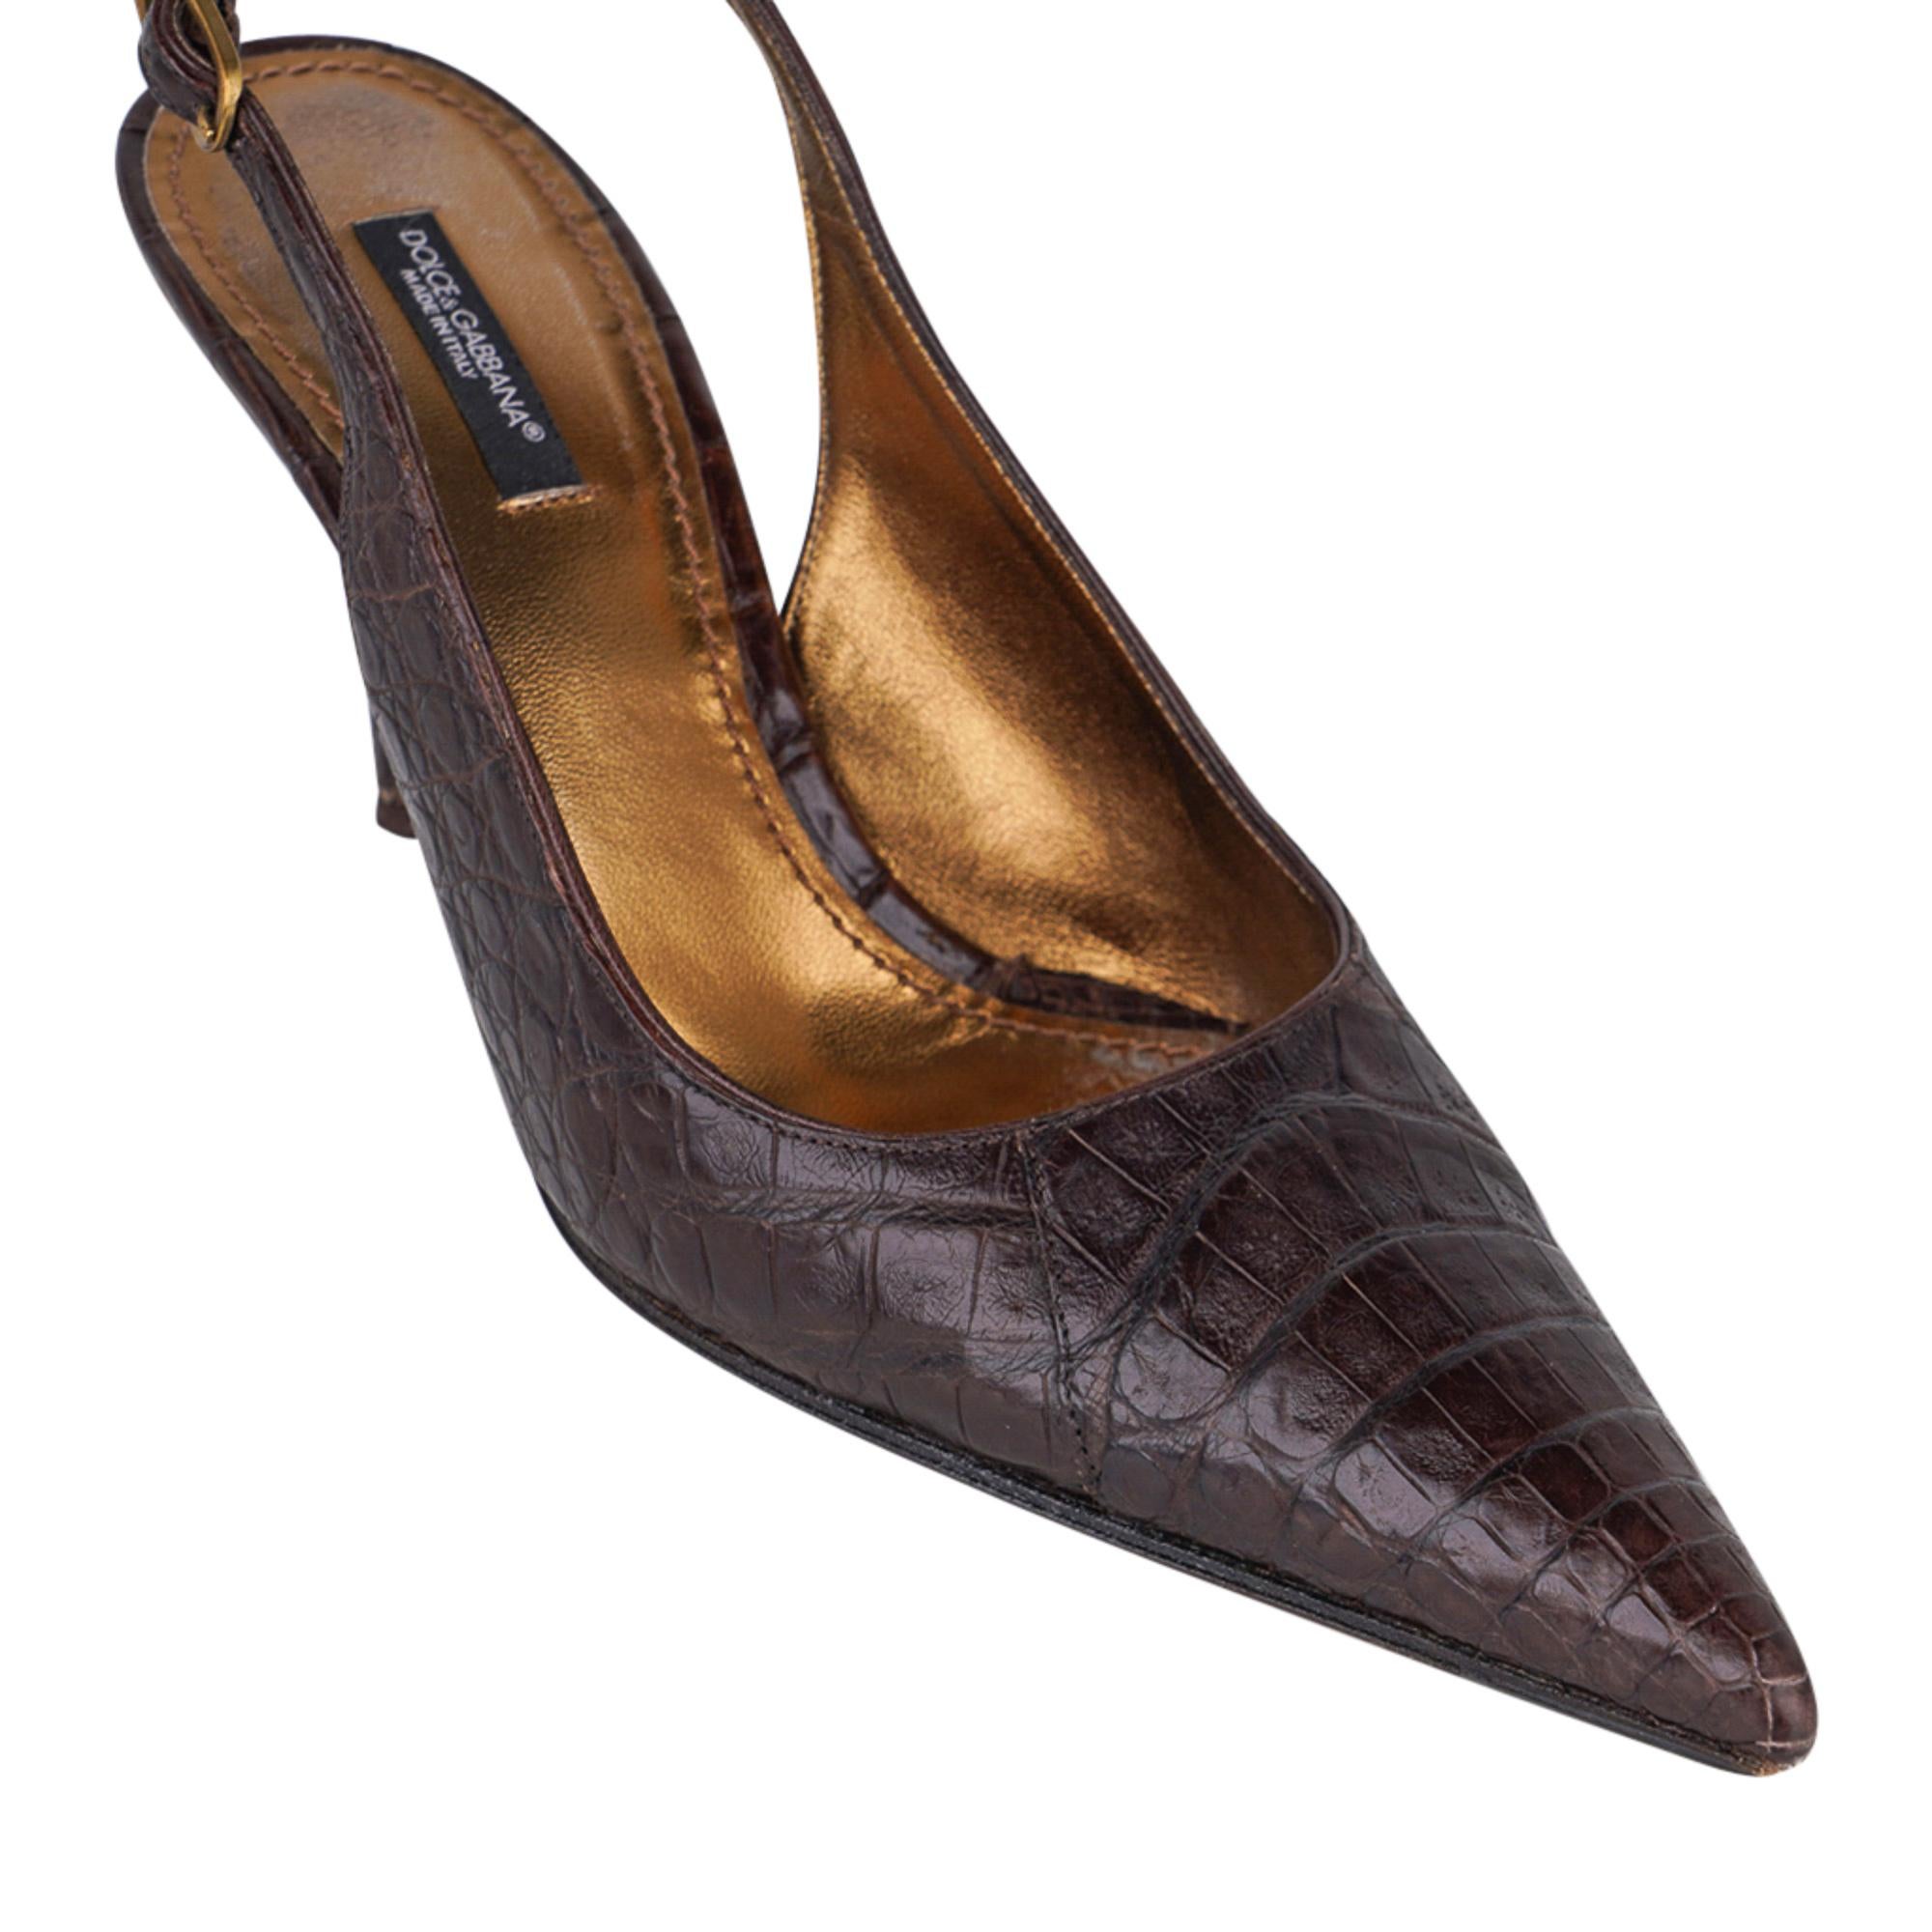 Mightychic offer guaranteed authentic Dolce&Gabbana signature slingback in rich dark brown matte crocodile.
Perfect size heel covered in crocodile.
You will keep these forever.
final sale

SIZE 40
USA SIZE 10 - fits 9

SHOE MEASURES:
HEEL 